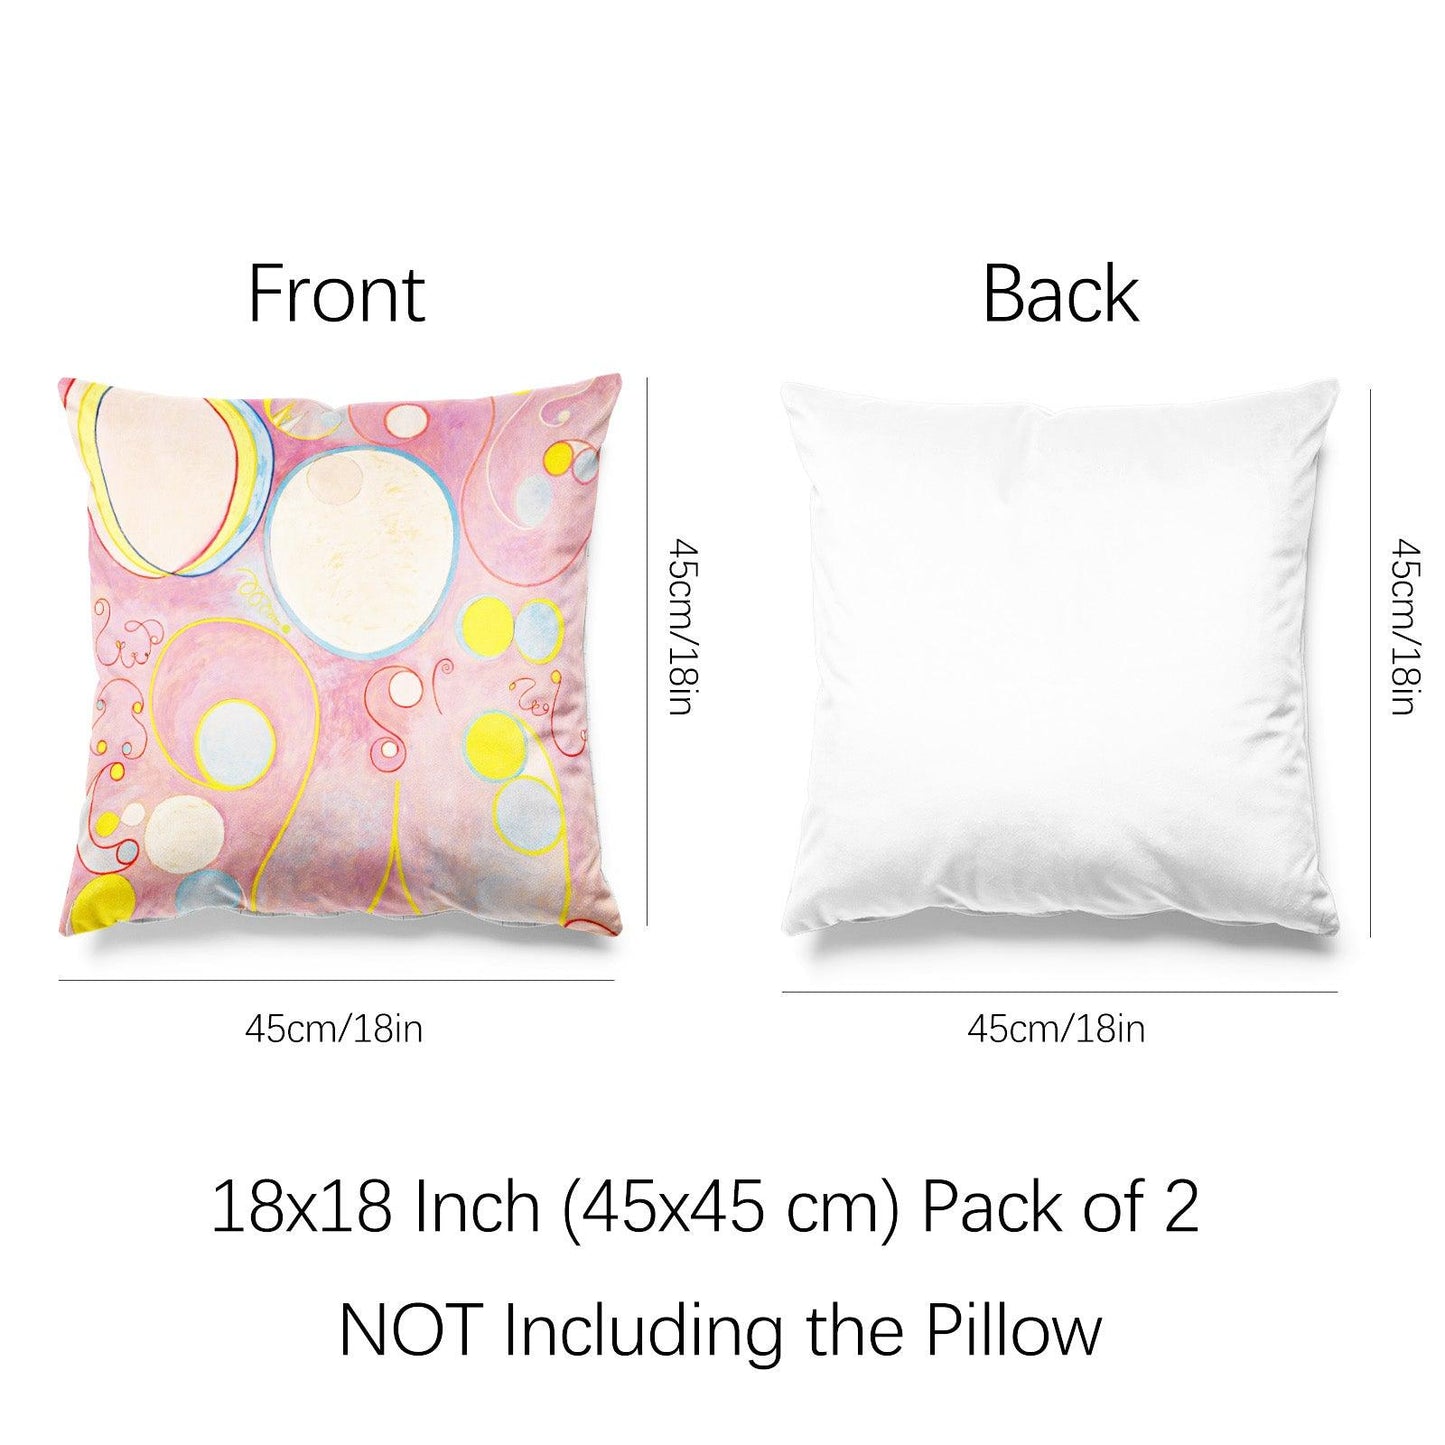 Art Abstract Throw Pillow Covers Pack of 2 18x18 Inch (The Ten Largest No.8 by Hilma af Klint) - Berkin Arts